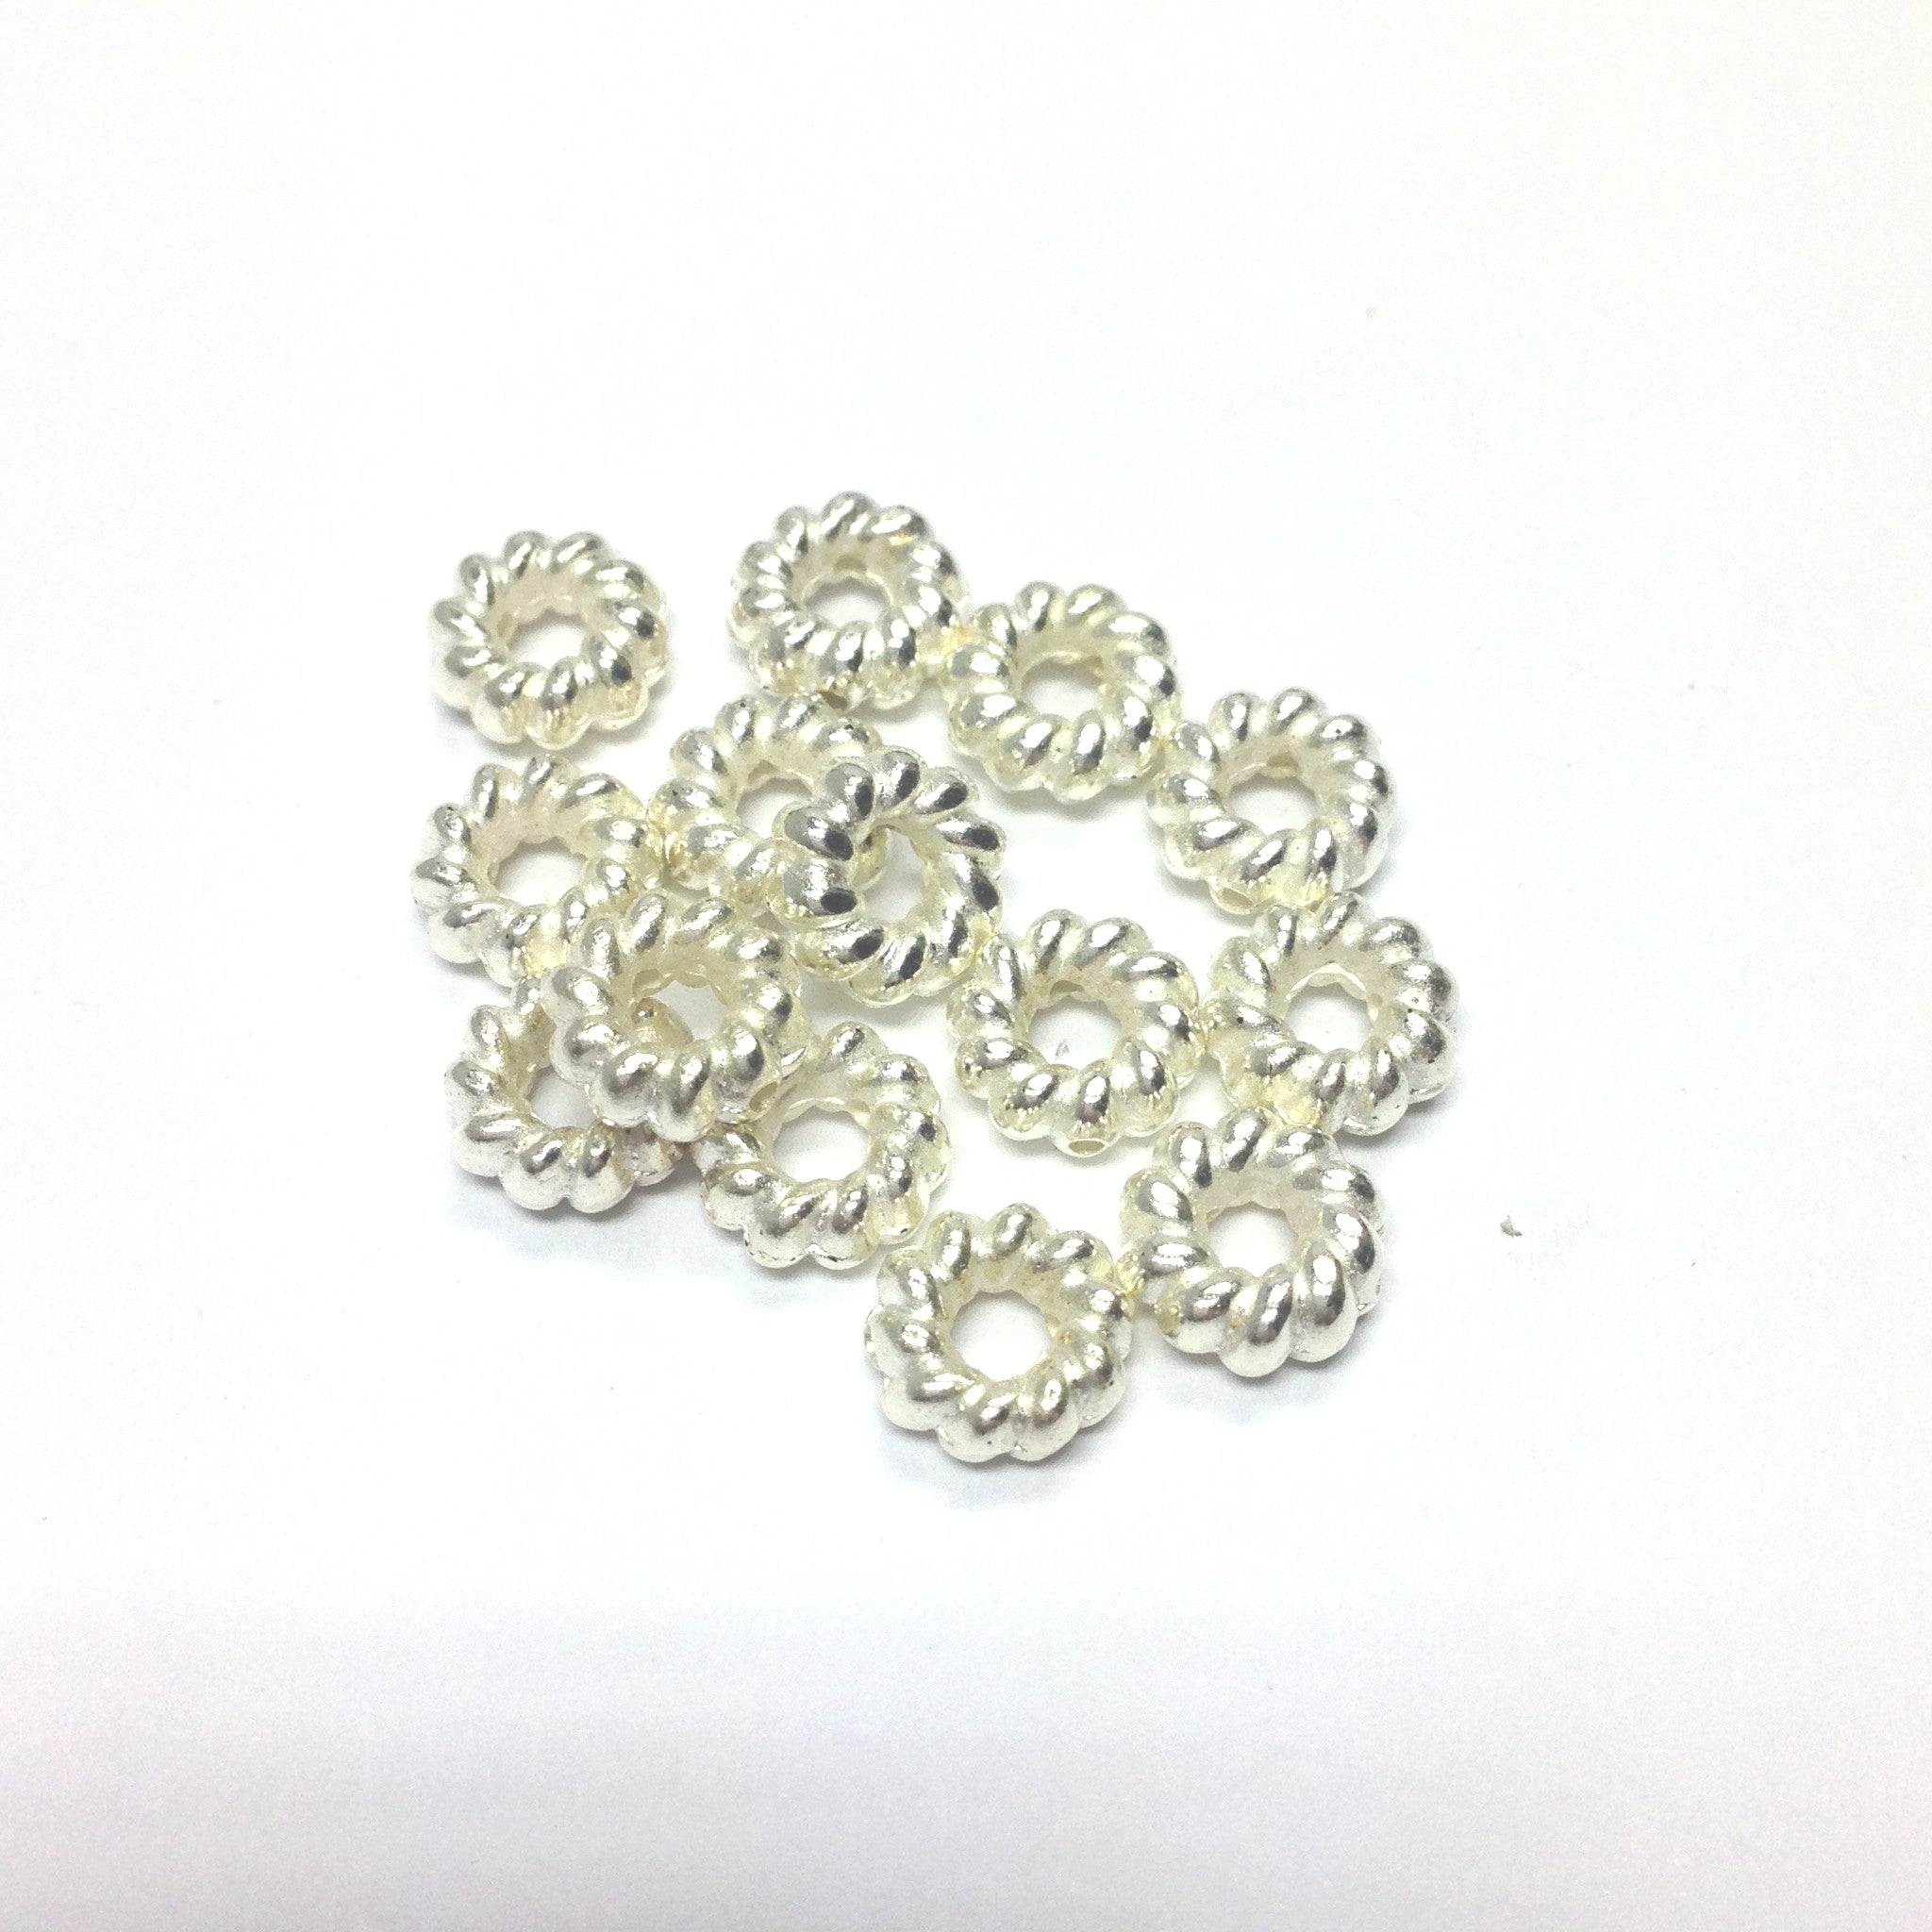 9MM Silver Fancy Ring Bead (144 pieces)